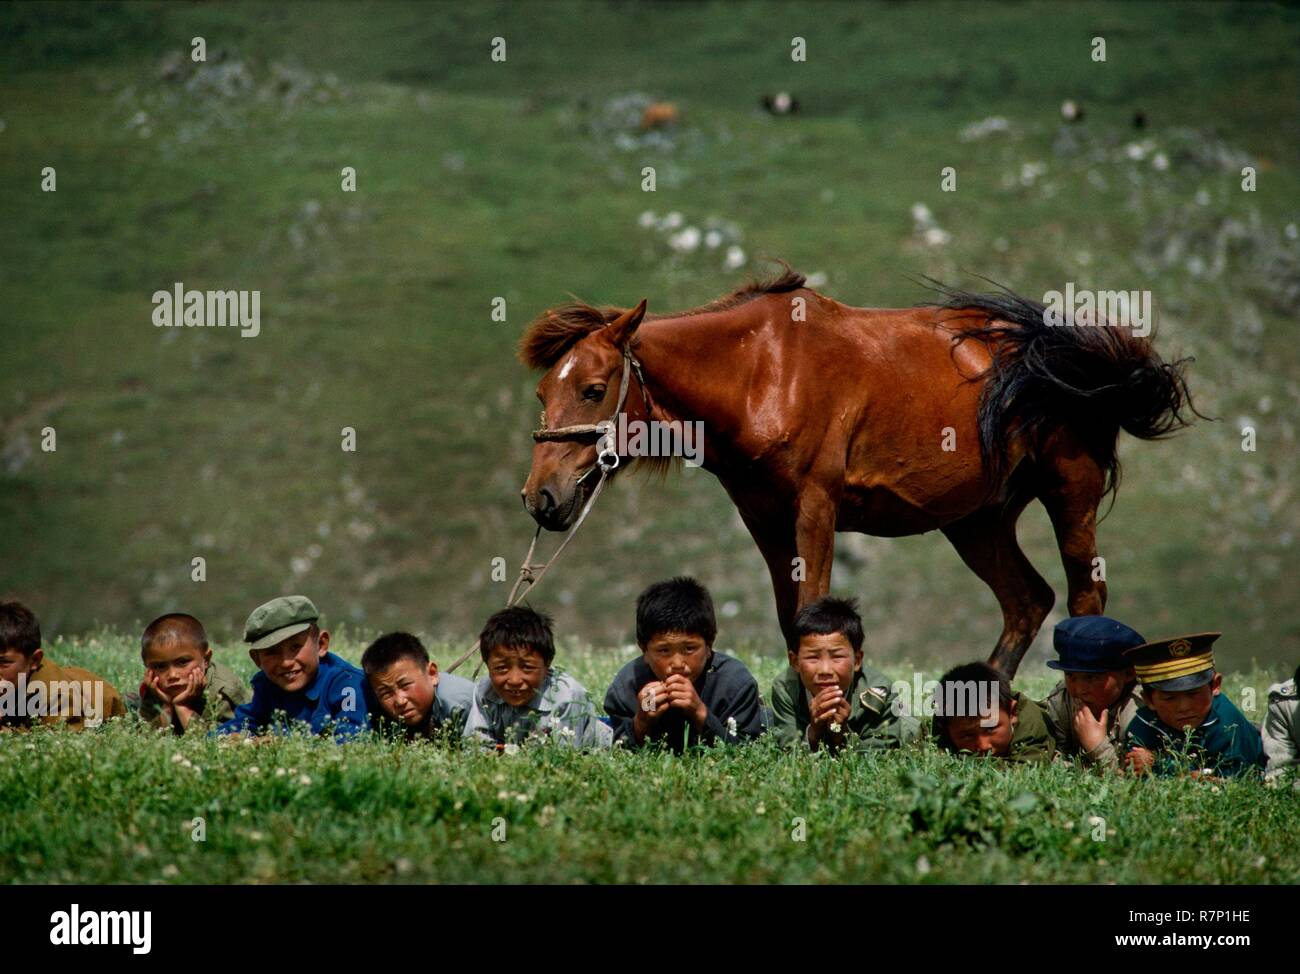 China, Xinjiang Autonomous Province, 1994 On the heights of Mount Altai, a goup of boys are posing in the grass in front of a horse Stock Photo